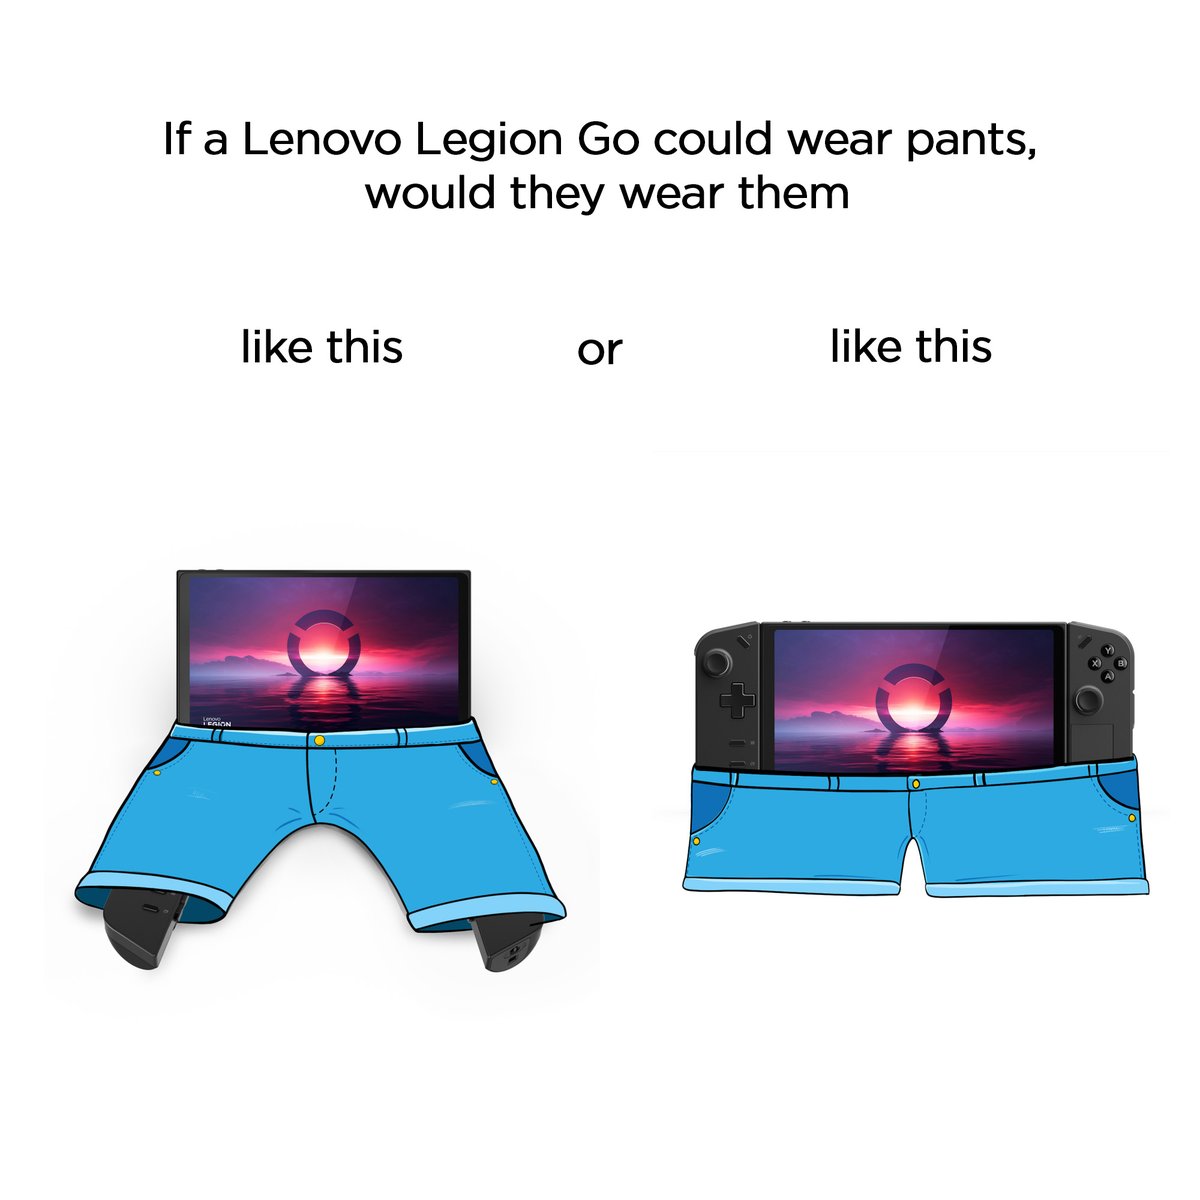 We put our trousers on one controller handle at a time, just like everyone else. #LegionGo